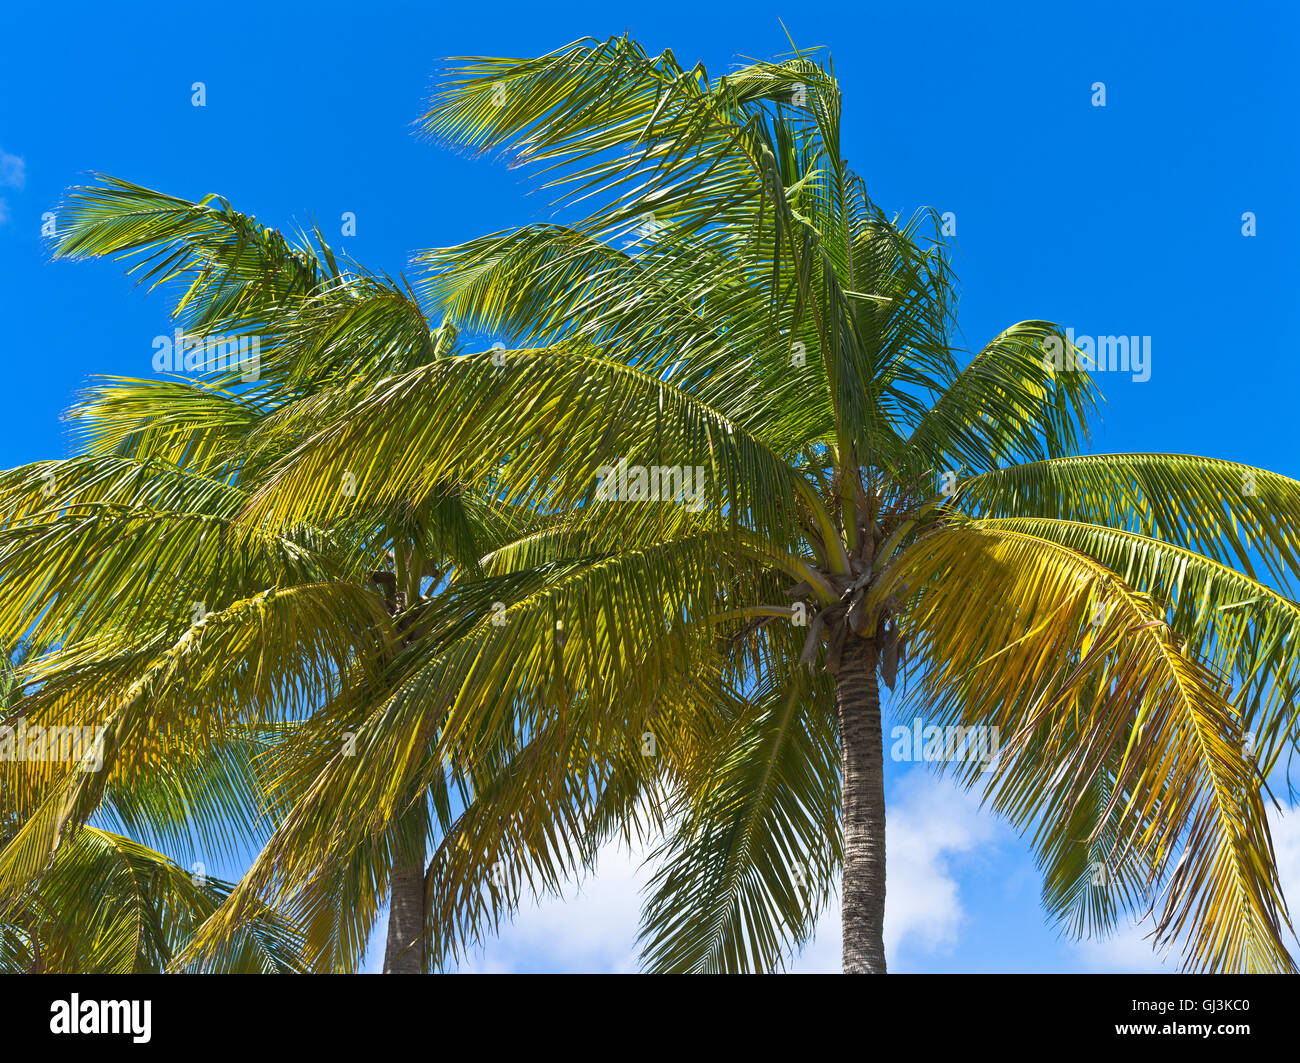 dh  ST MAARTEN CARIBBEAN Palm trees leaves blowing in the wind tree close up Stock Photo